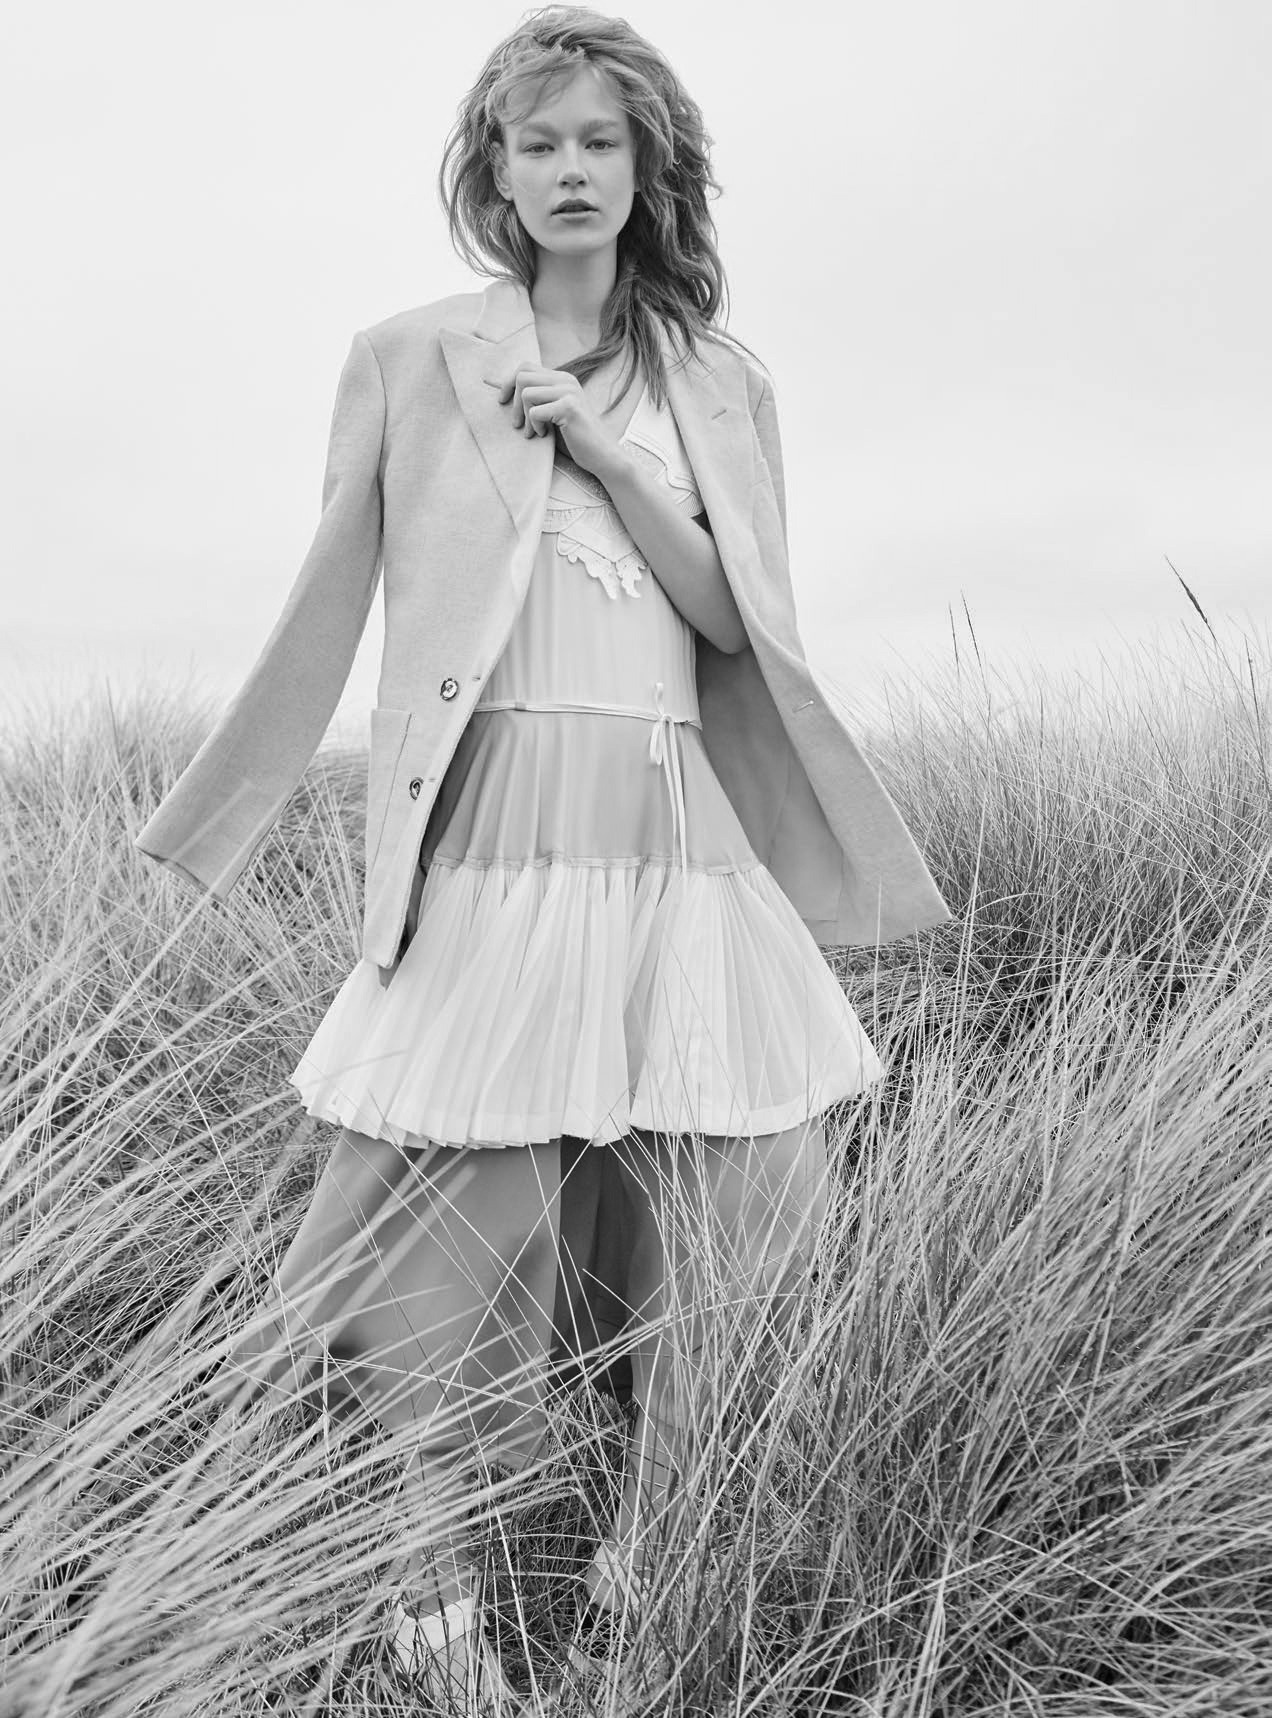 vogue-at-heart:  Hollie-May Saker in “Beside The Silver Sea” for Harper’s